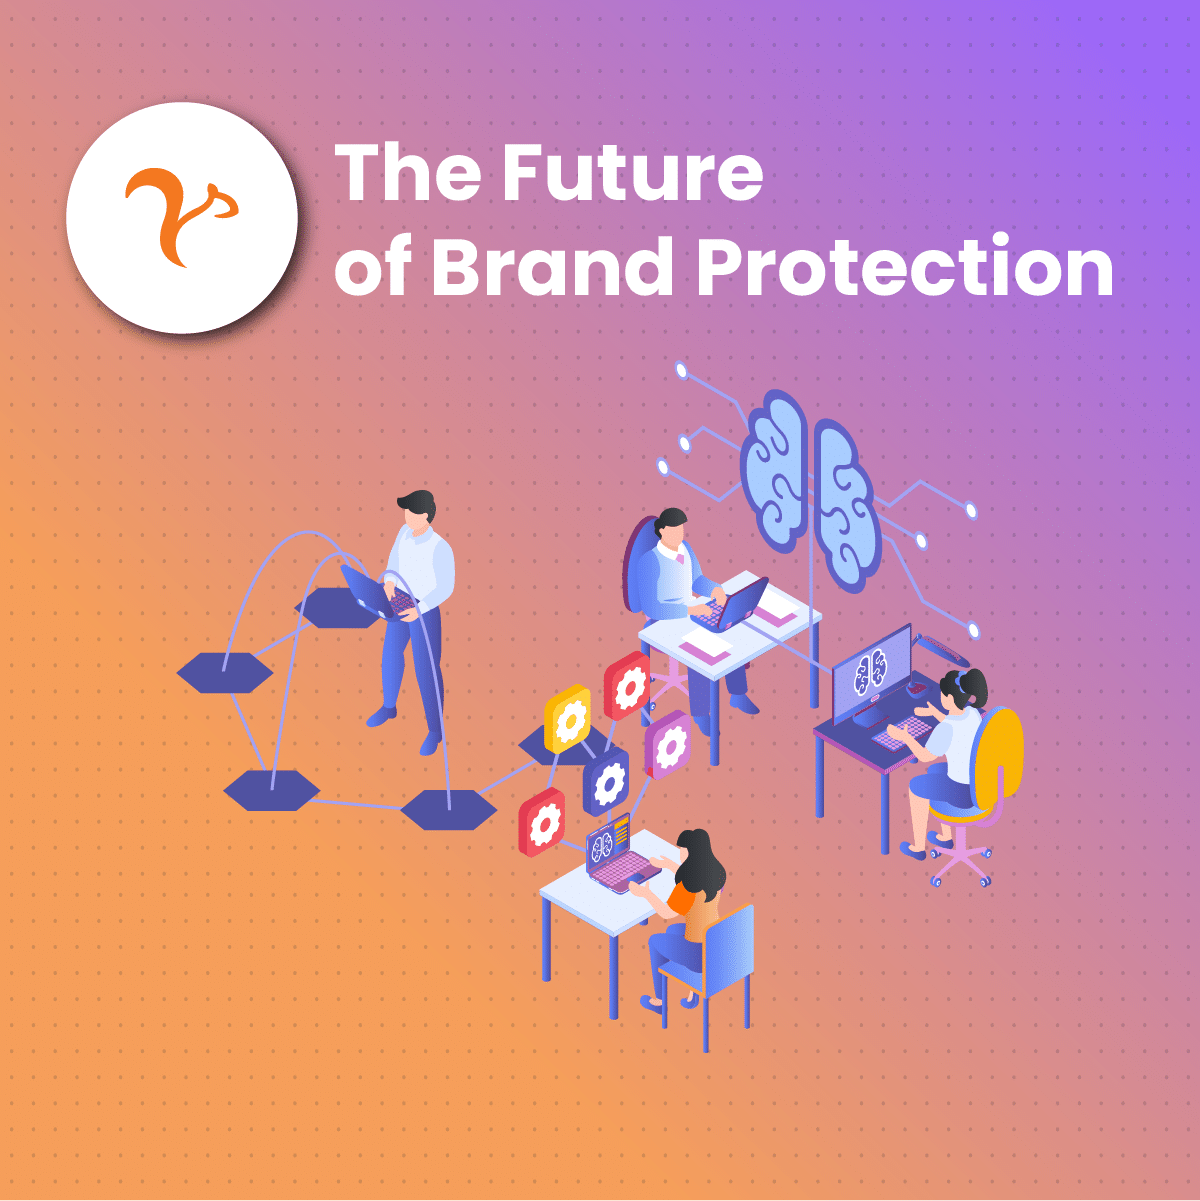 The Future of Brand Protection